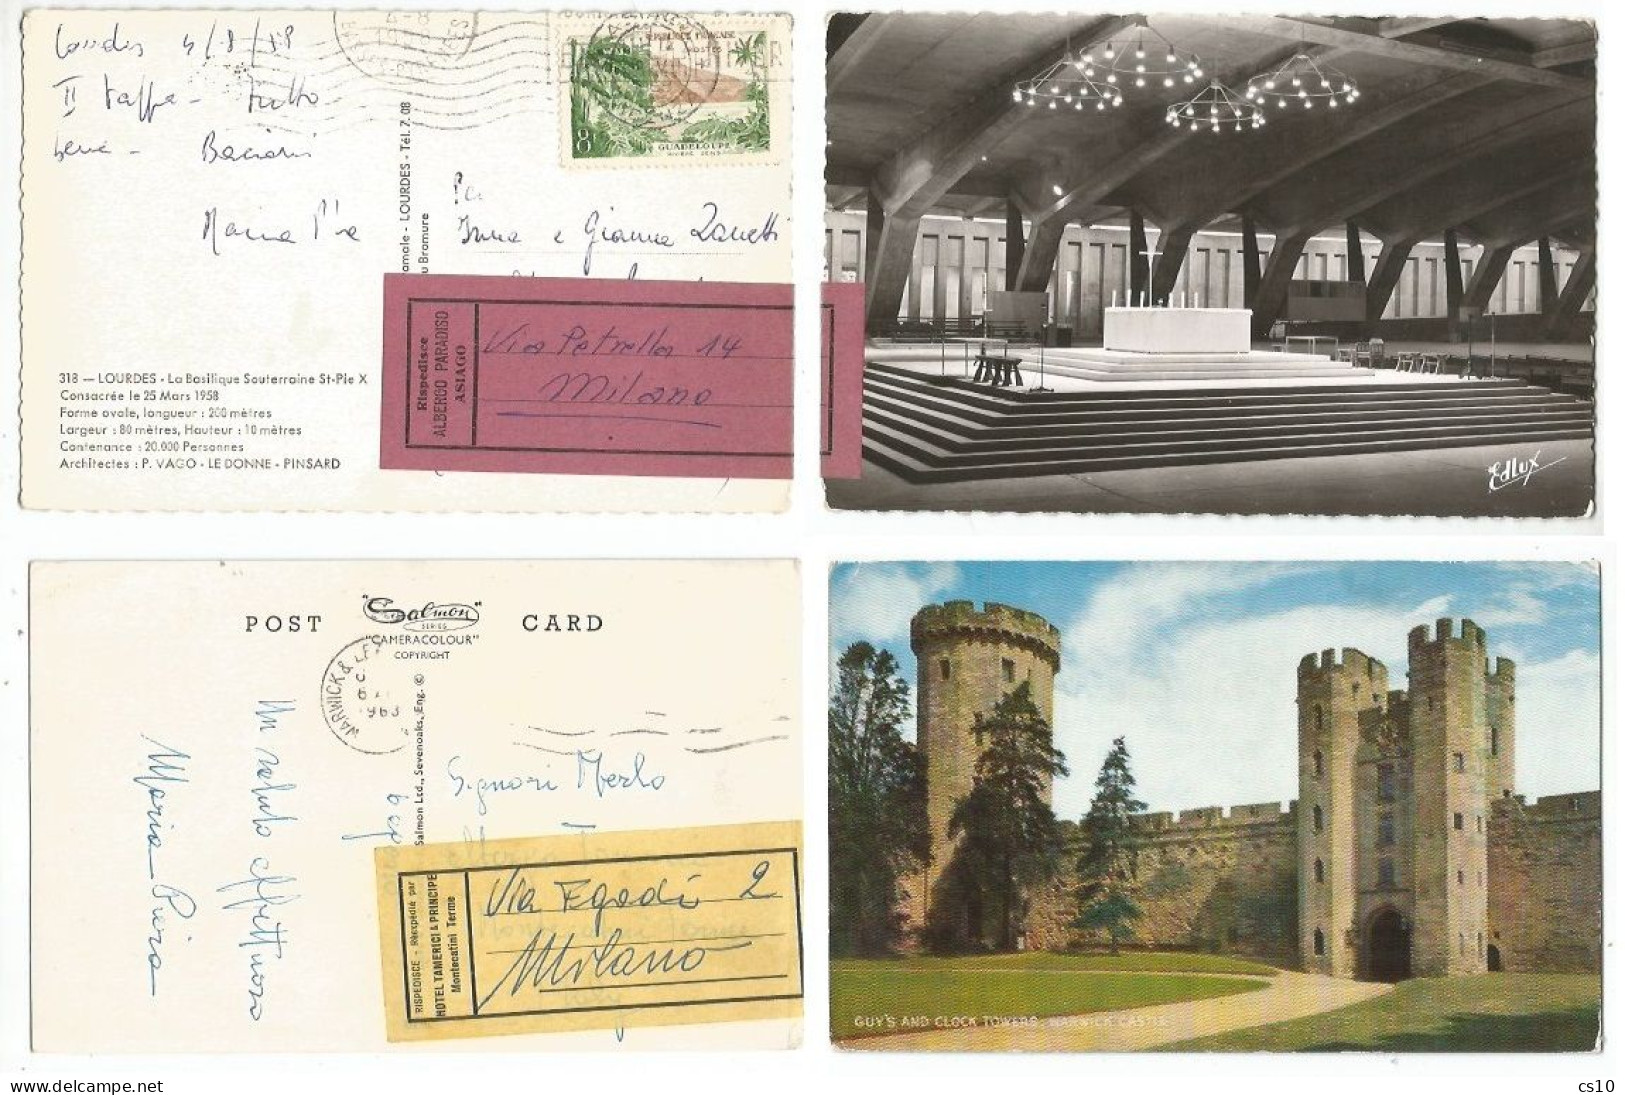 Hotel Mail Forwarding Labels # 2 Pcards From UK & France By 2 Different Italy Hotels Asiago 1958 & Montecatini Terme '63 - Settore Alberghiero & Ristorazione